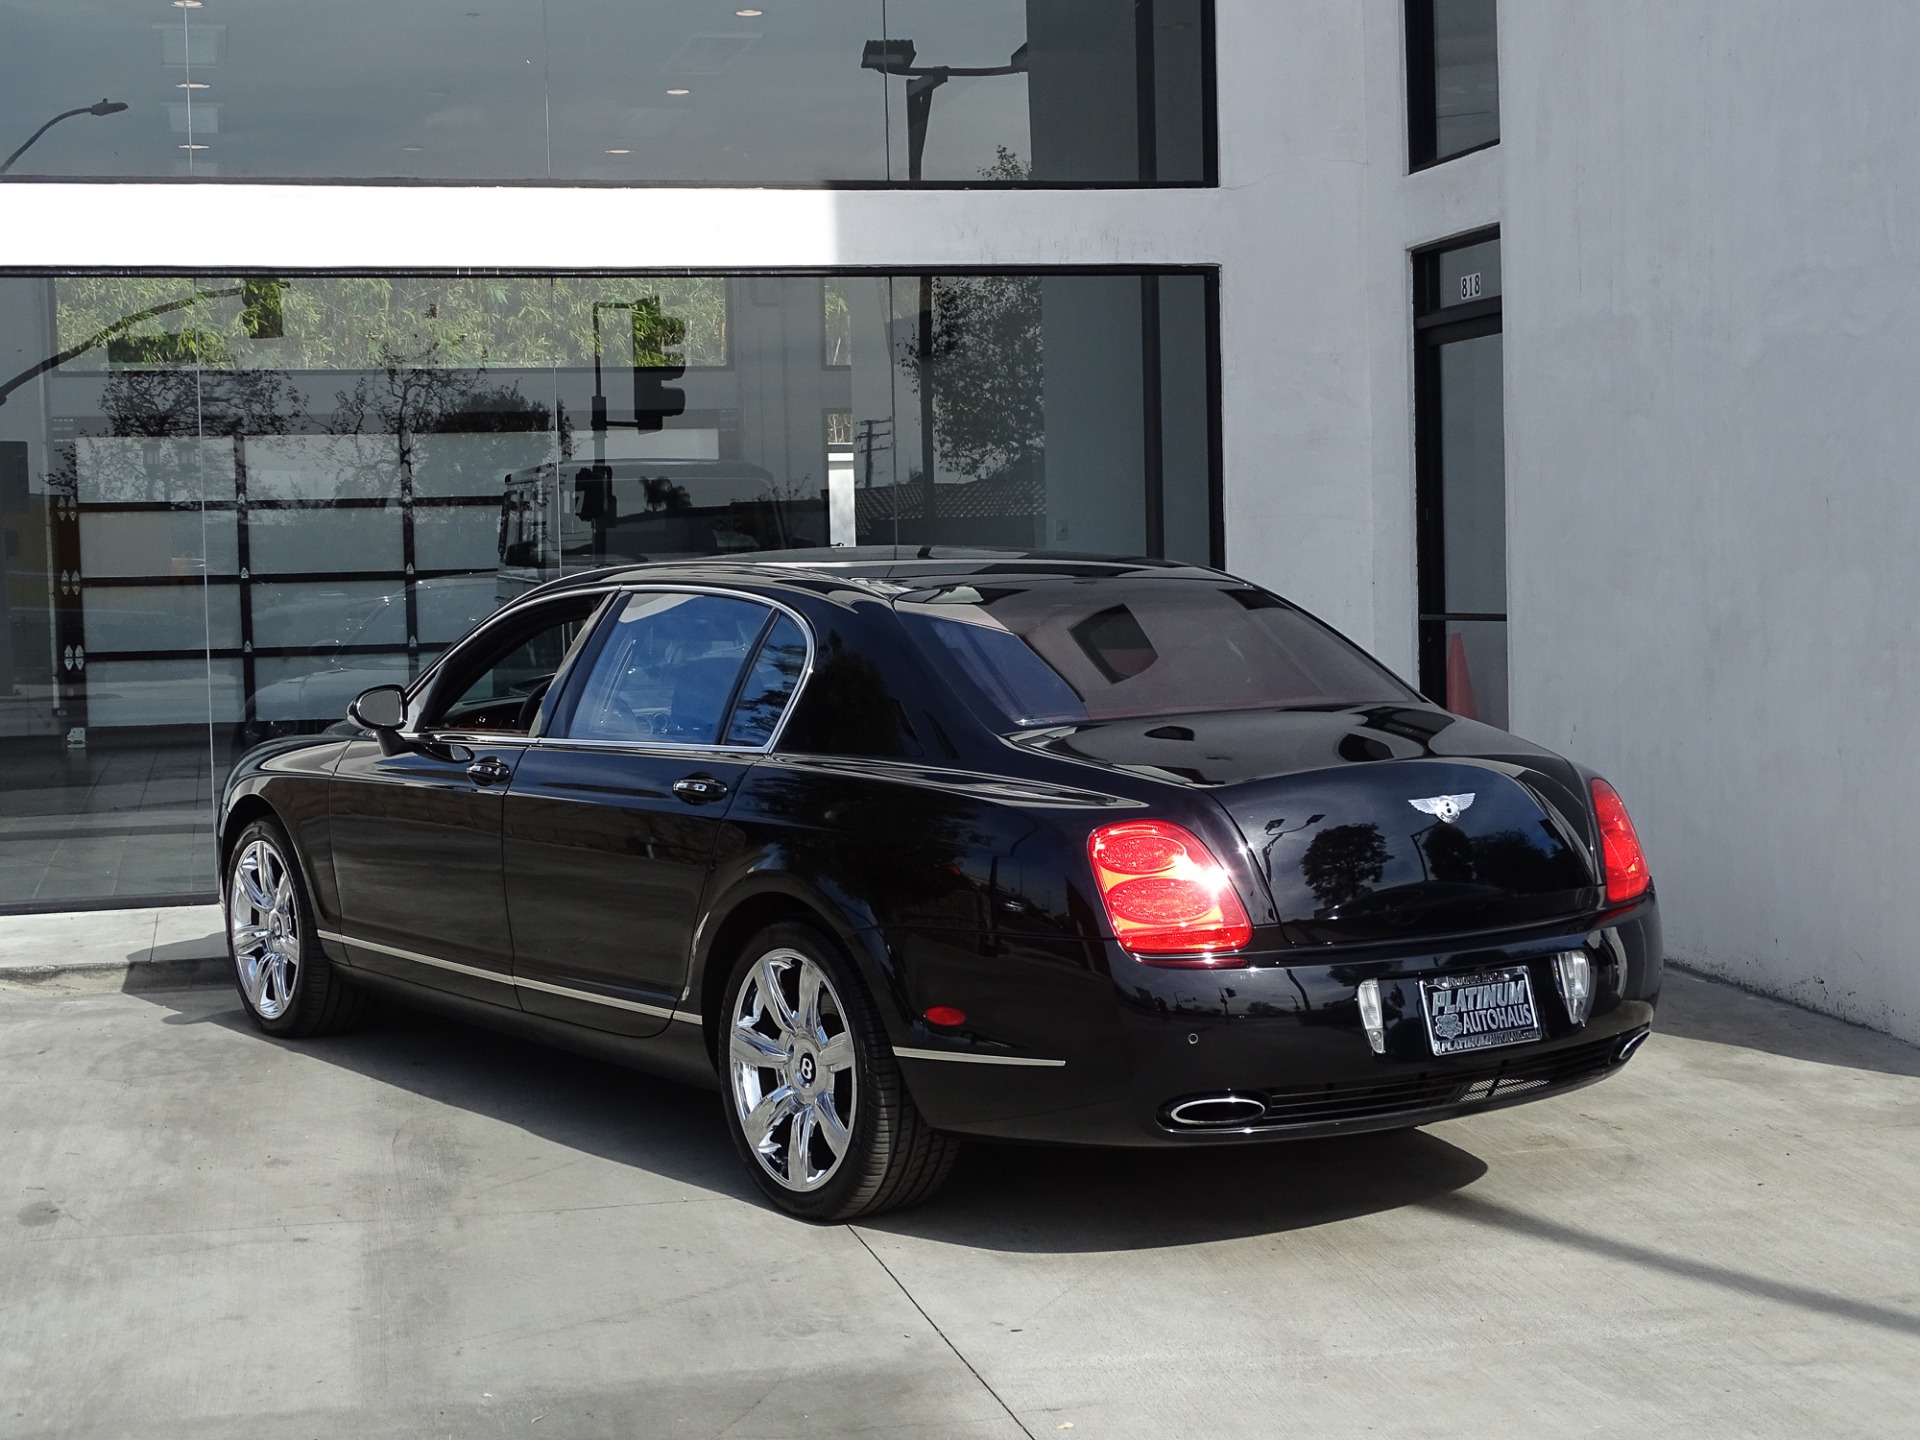 2008 Bentley Continental Flying Spur *** LOW MILES *** Stock # 6191A for  sale near Redondo Beach, CA | CA Bentley Dealer